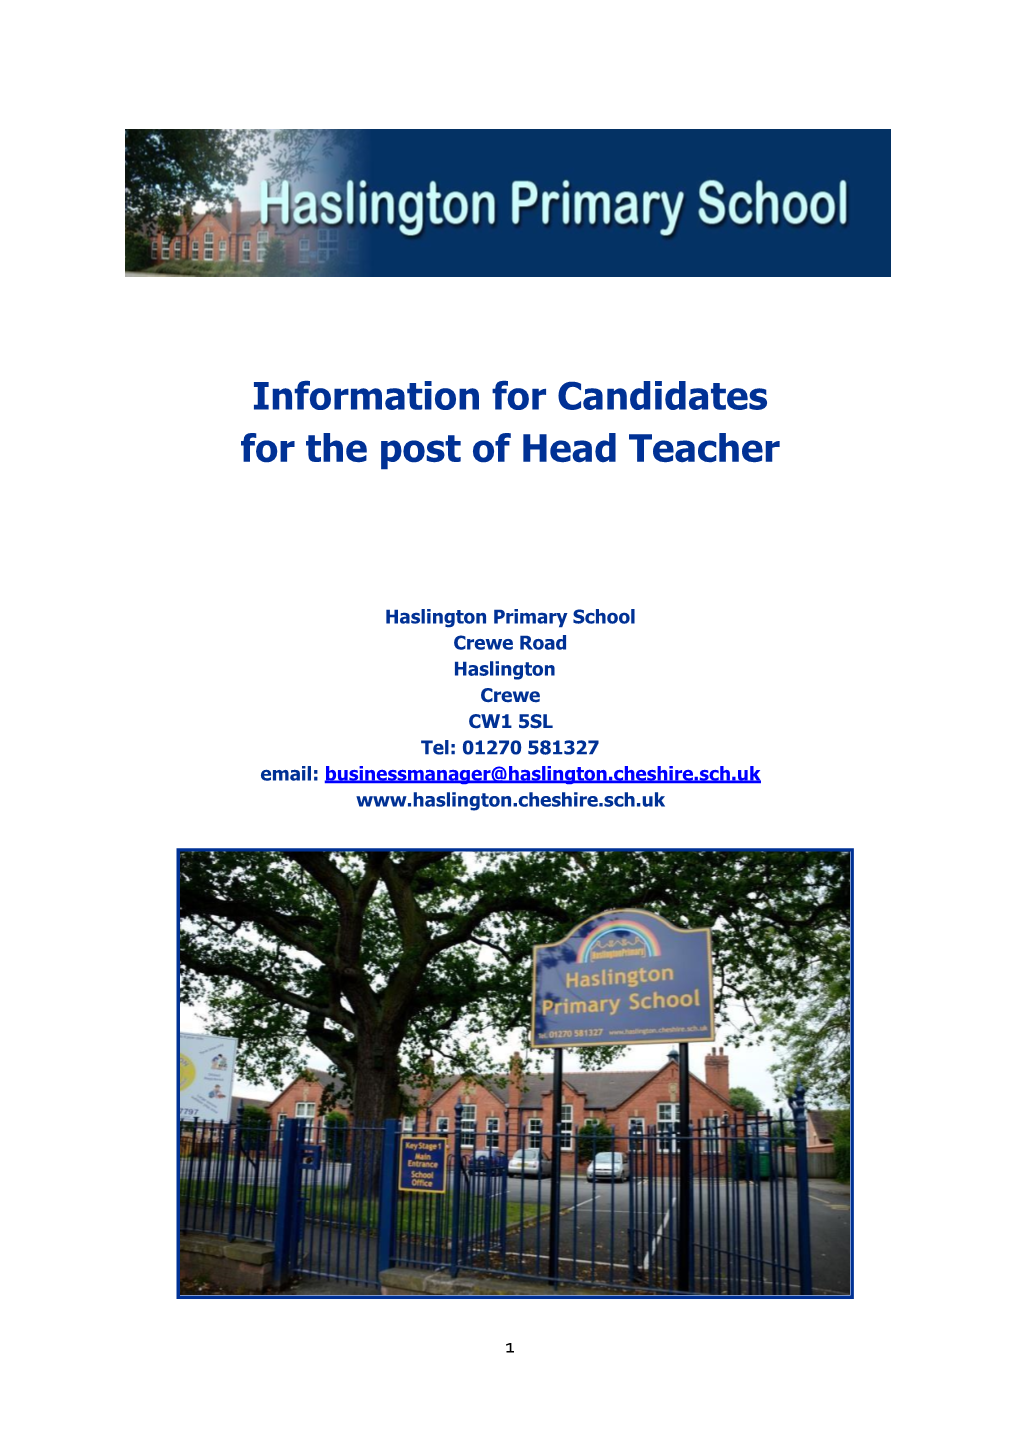 Information for Candidates for the Post of Head Teacher